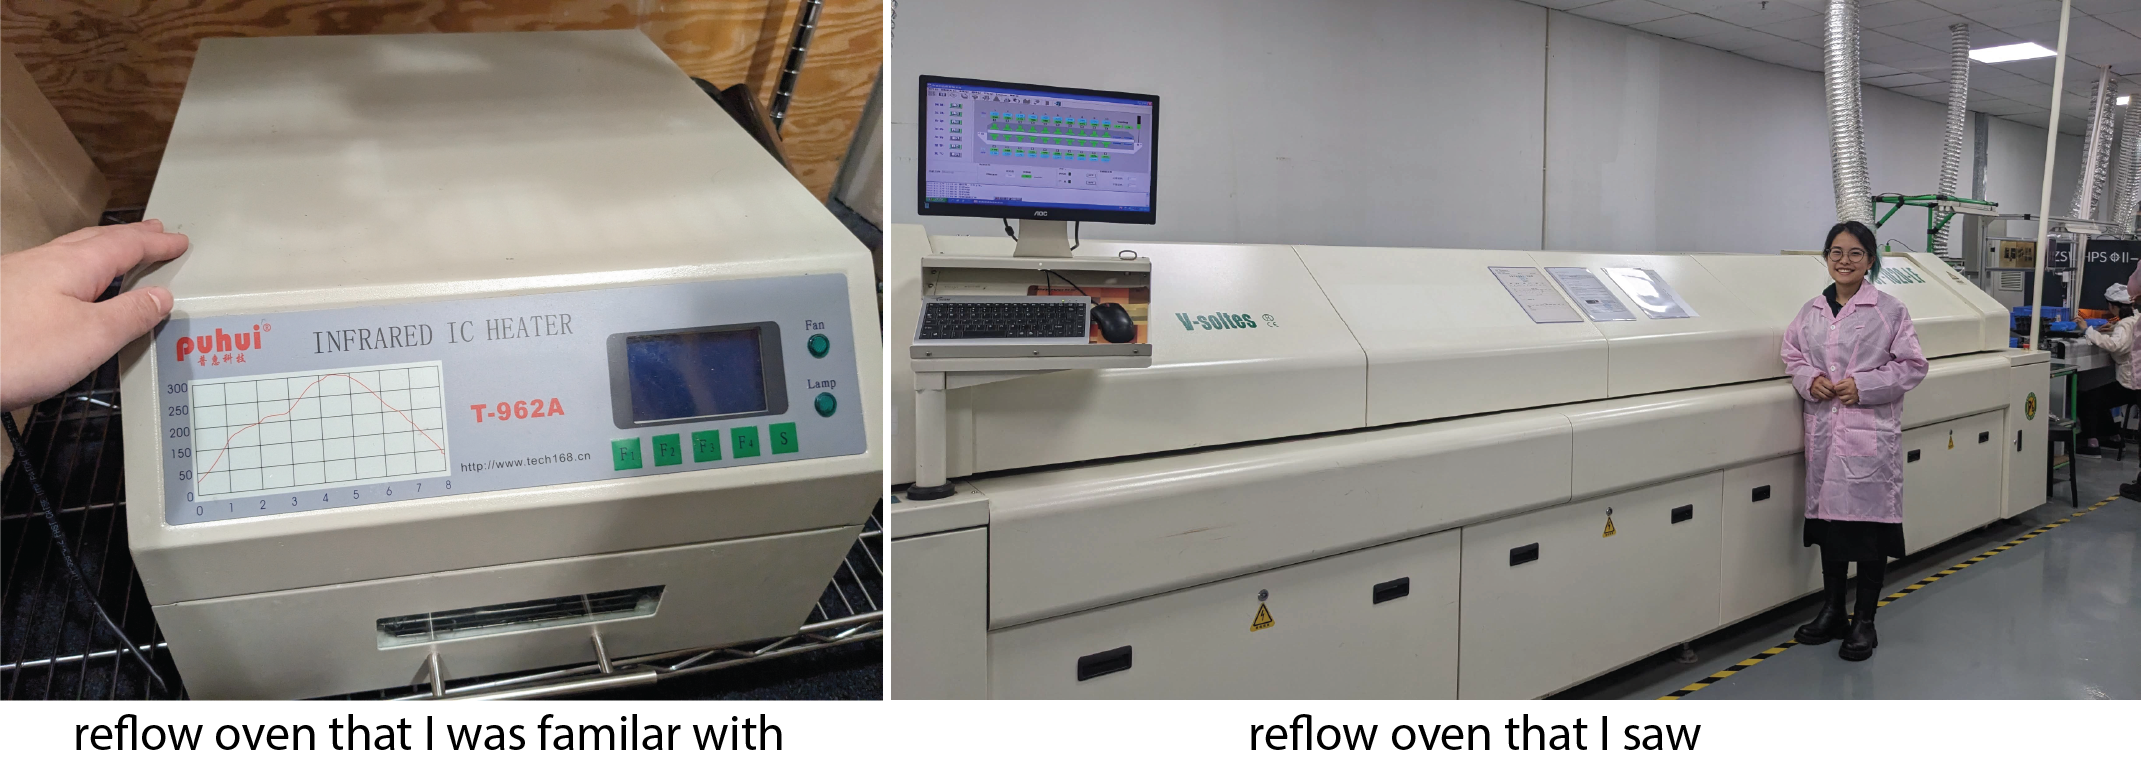 super big reflow oven compared to the small one I use in lab